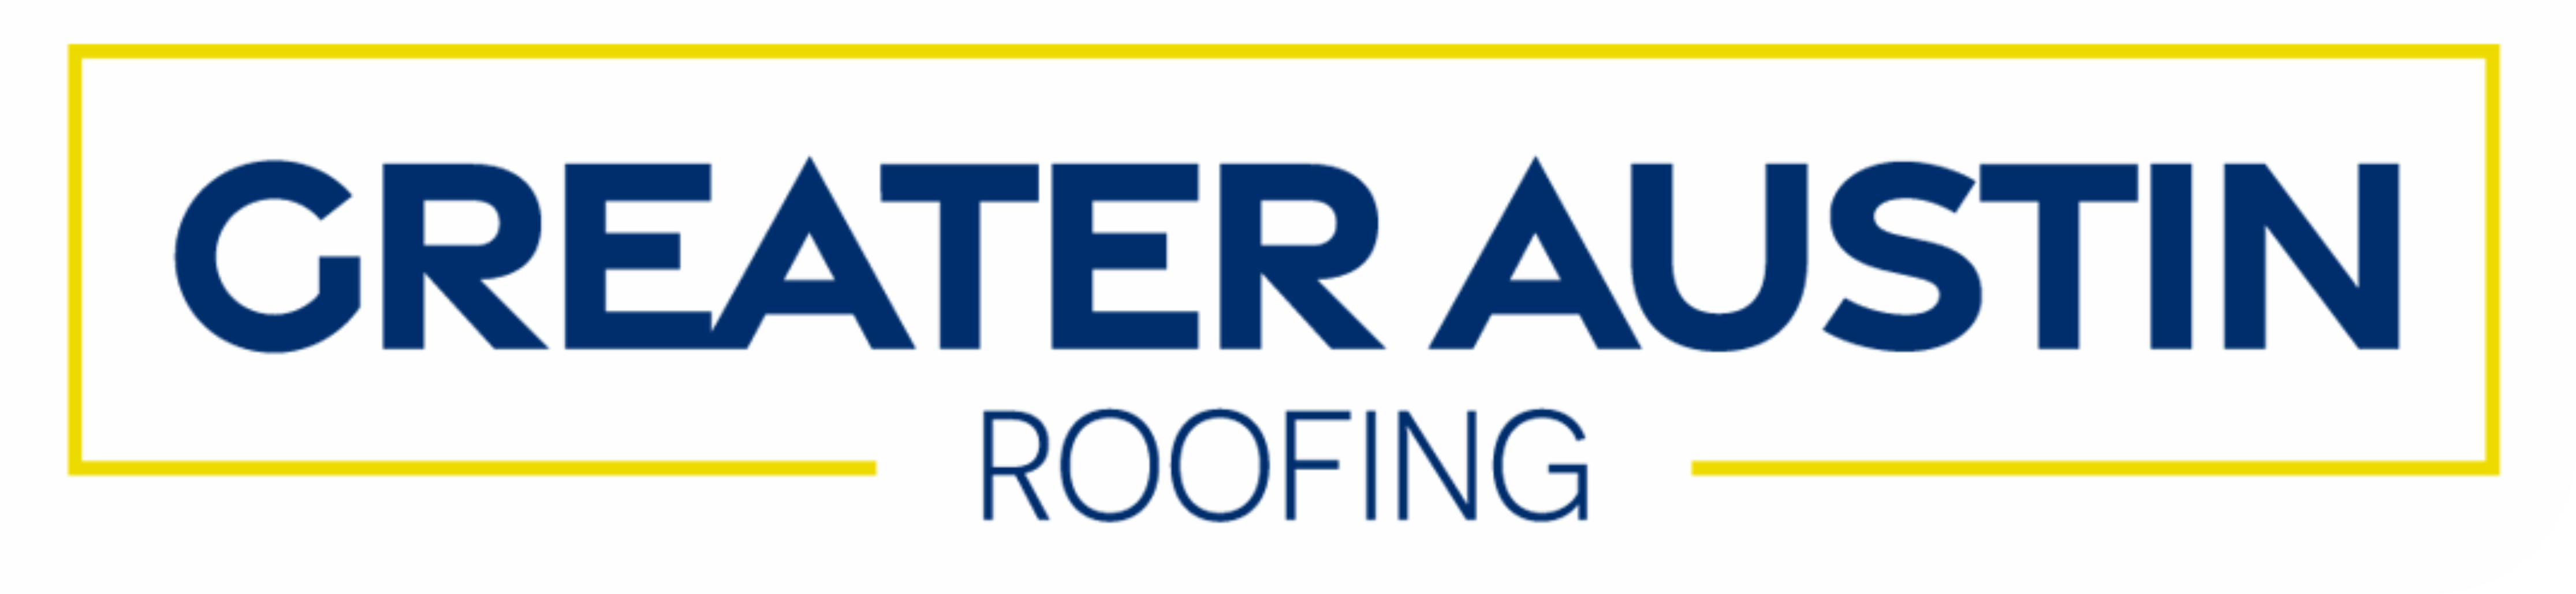 Greater Austin Roofing - Austin Texas Roofing Company